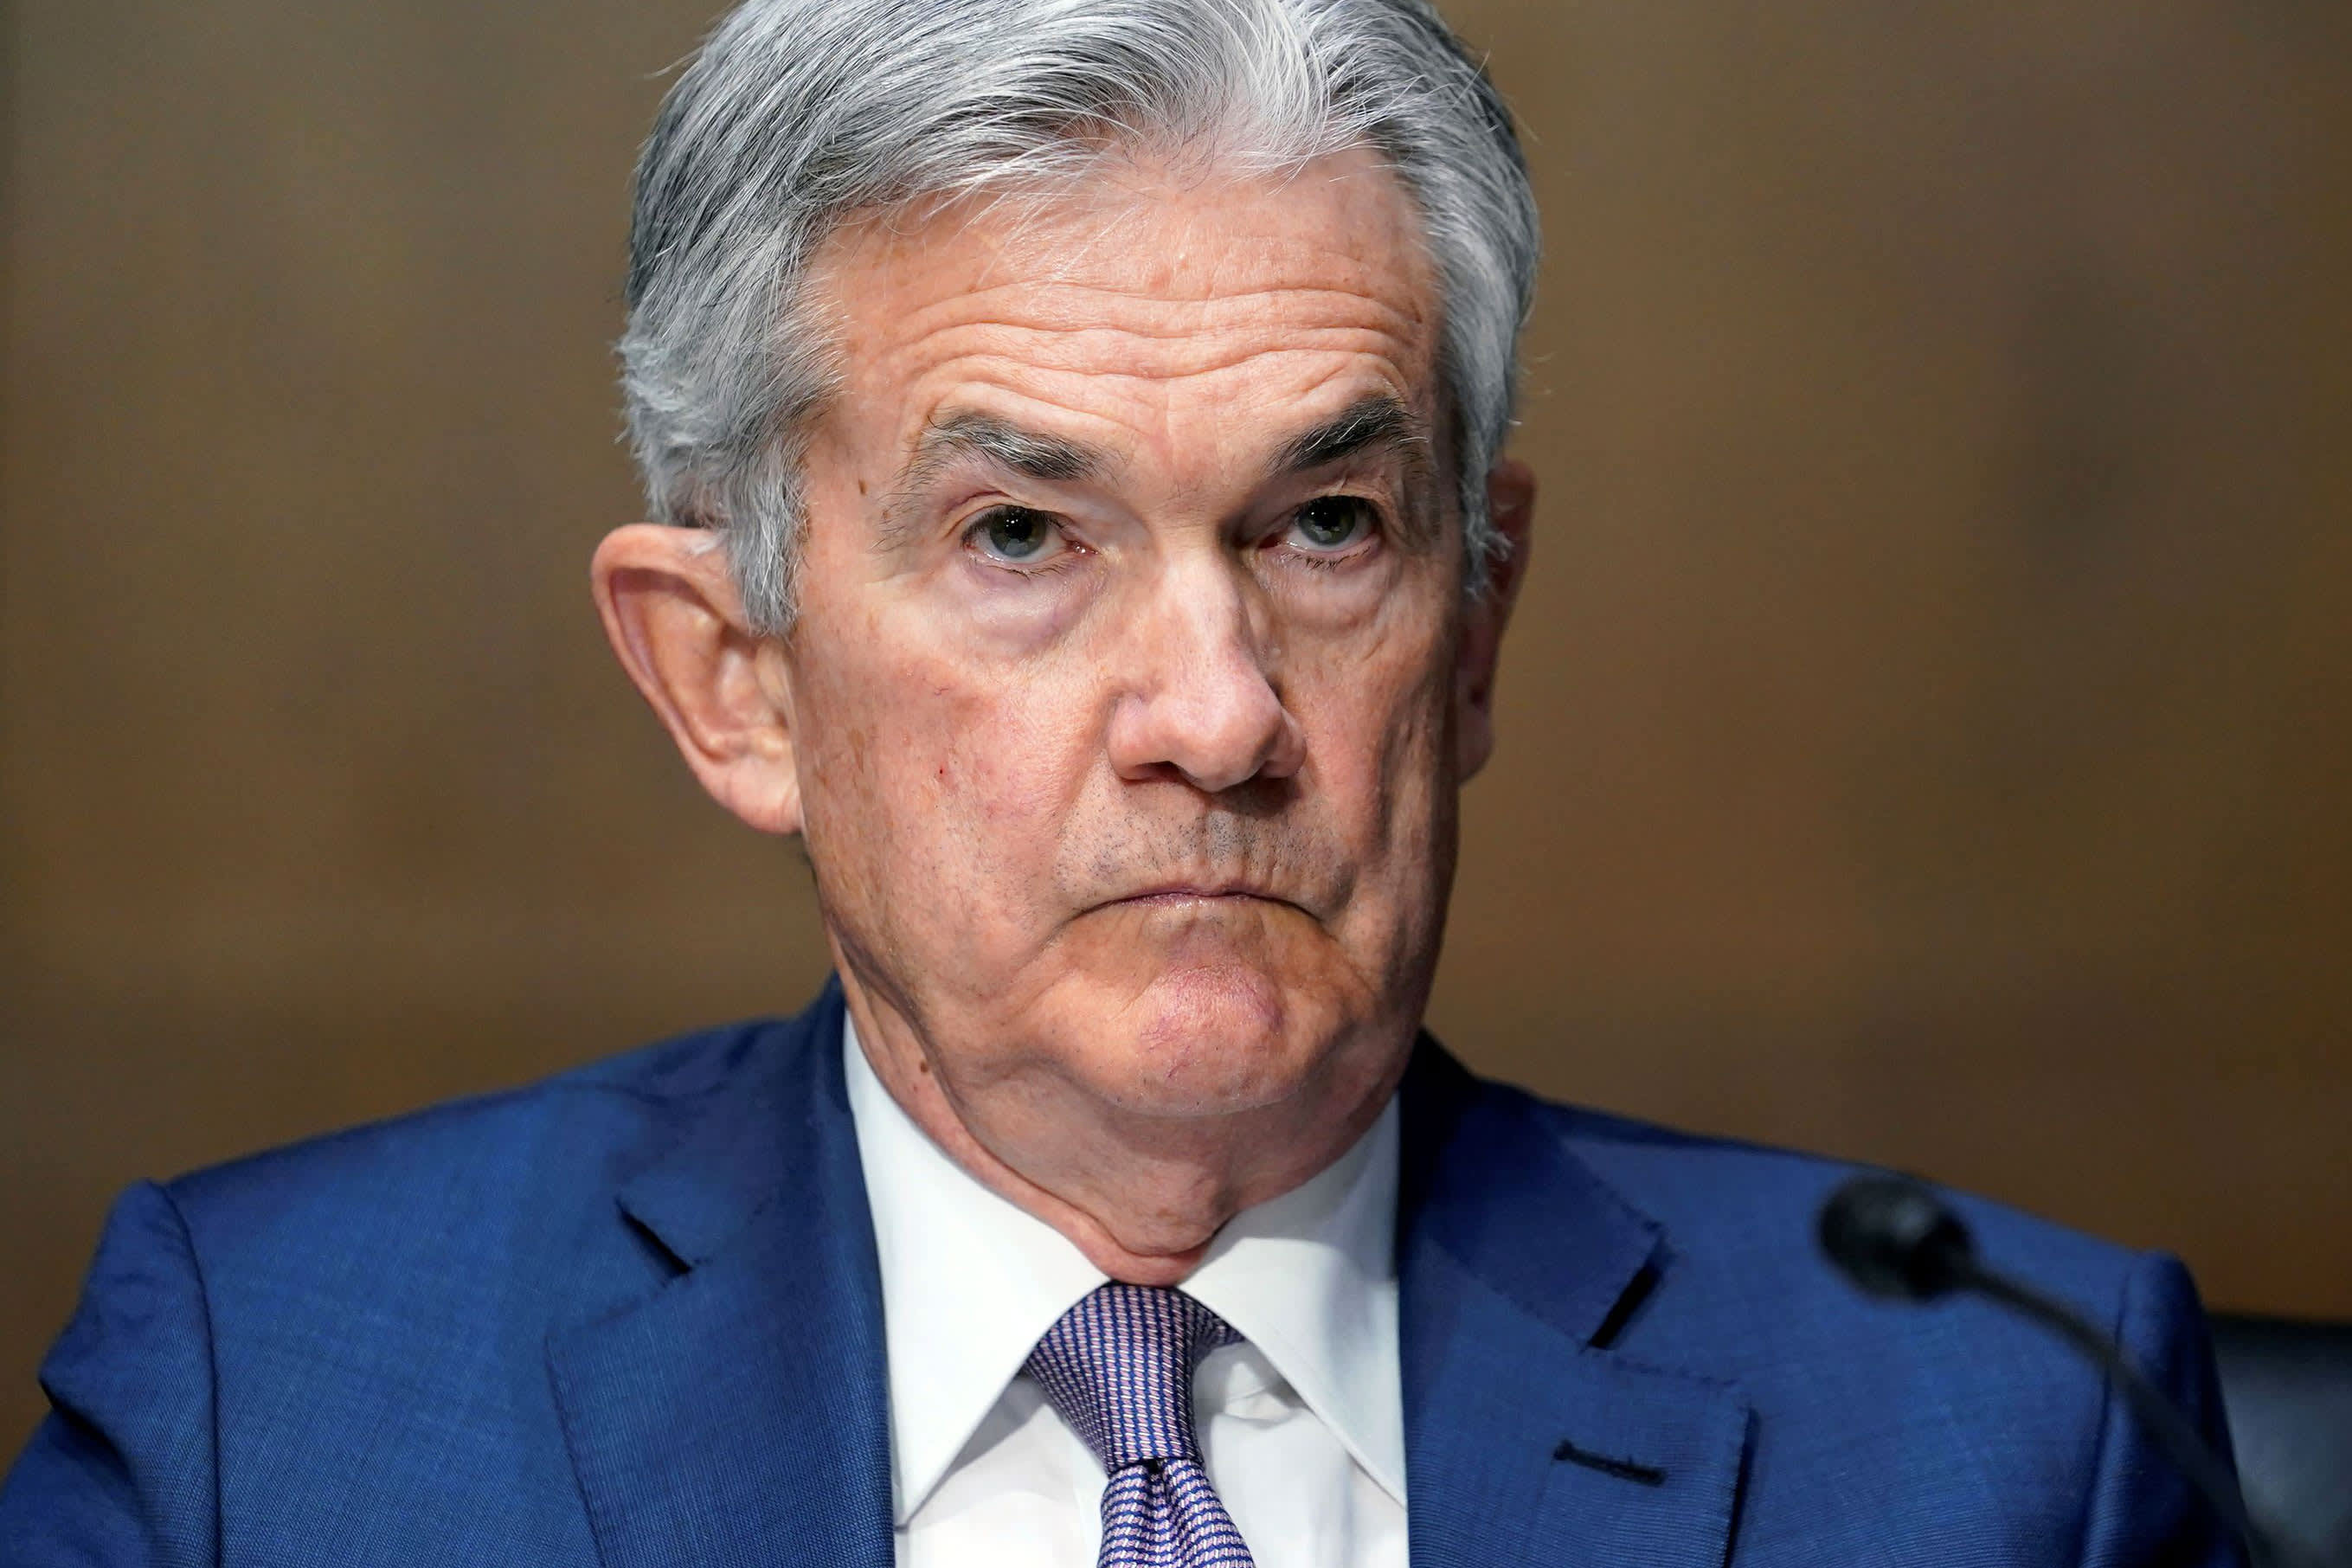 The Federal Reserve on Wednesday considerably raised its expectations for inflation this year and brought forward the time frame on when it will next 